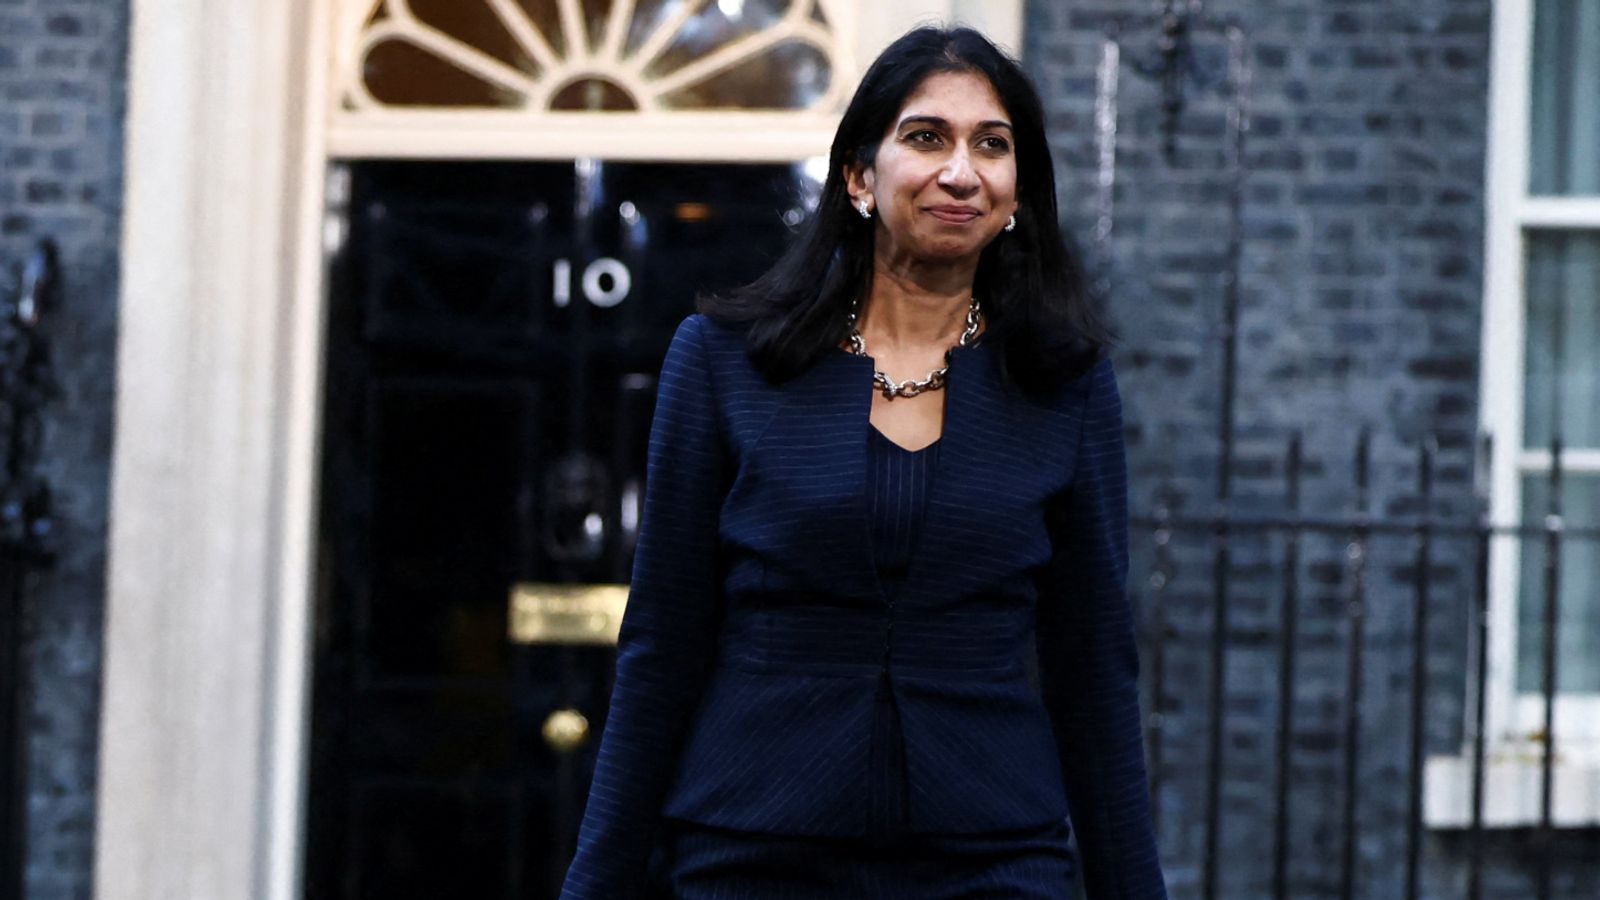 Suella Braverman meets Met chief amid Tory row over protest article